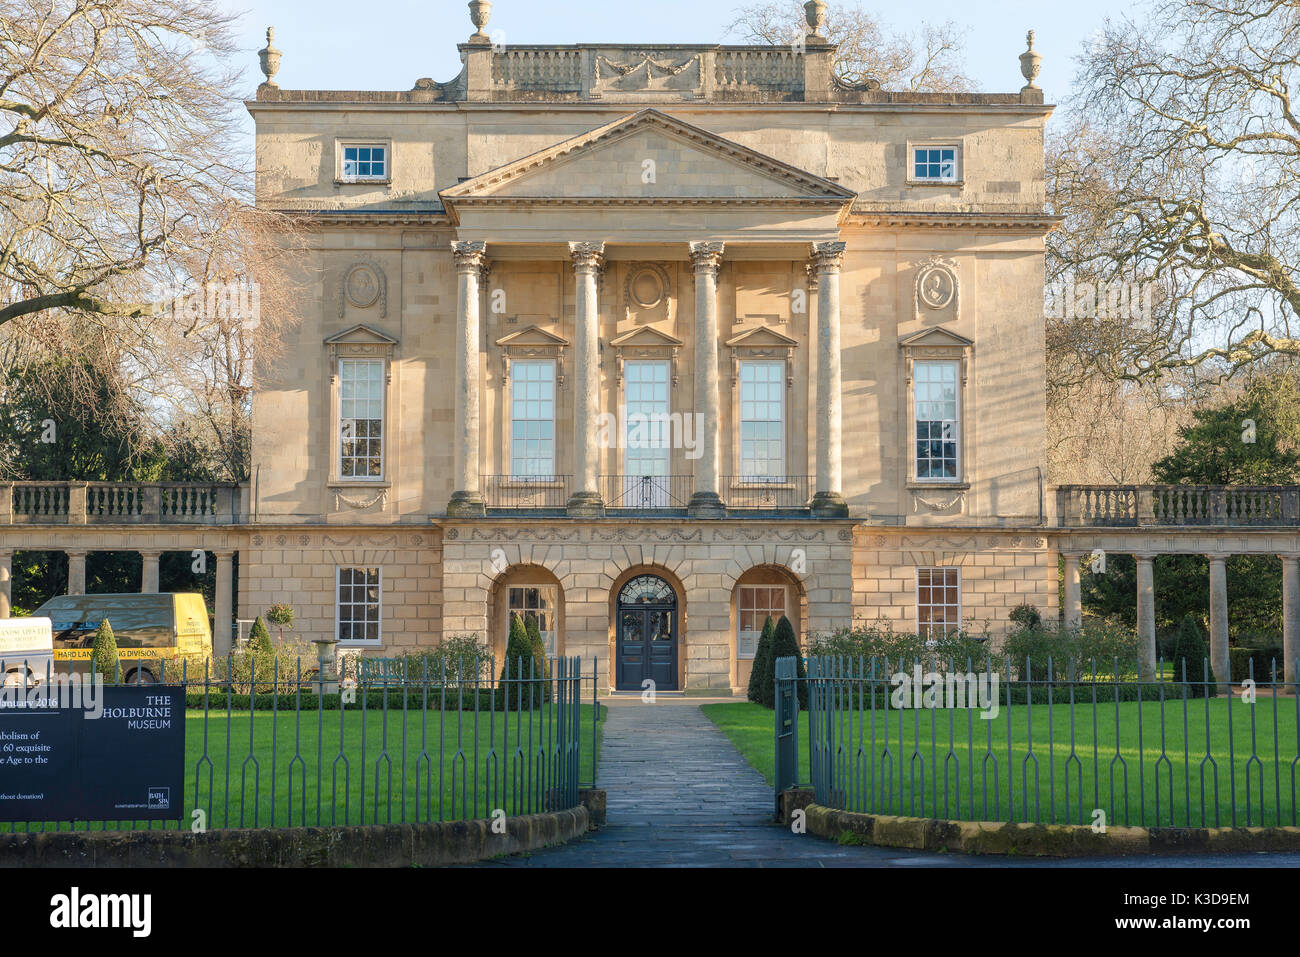 Holburne Museum Bath, front of the the Holburne Museum in Bath, a grand Georgian Palladian style building that houses an extensive art gallery, UK. Stock Photo